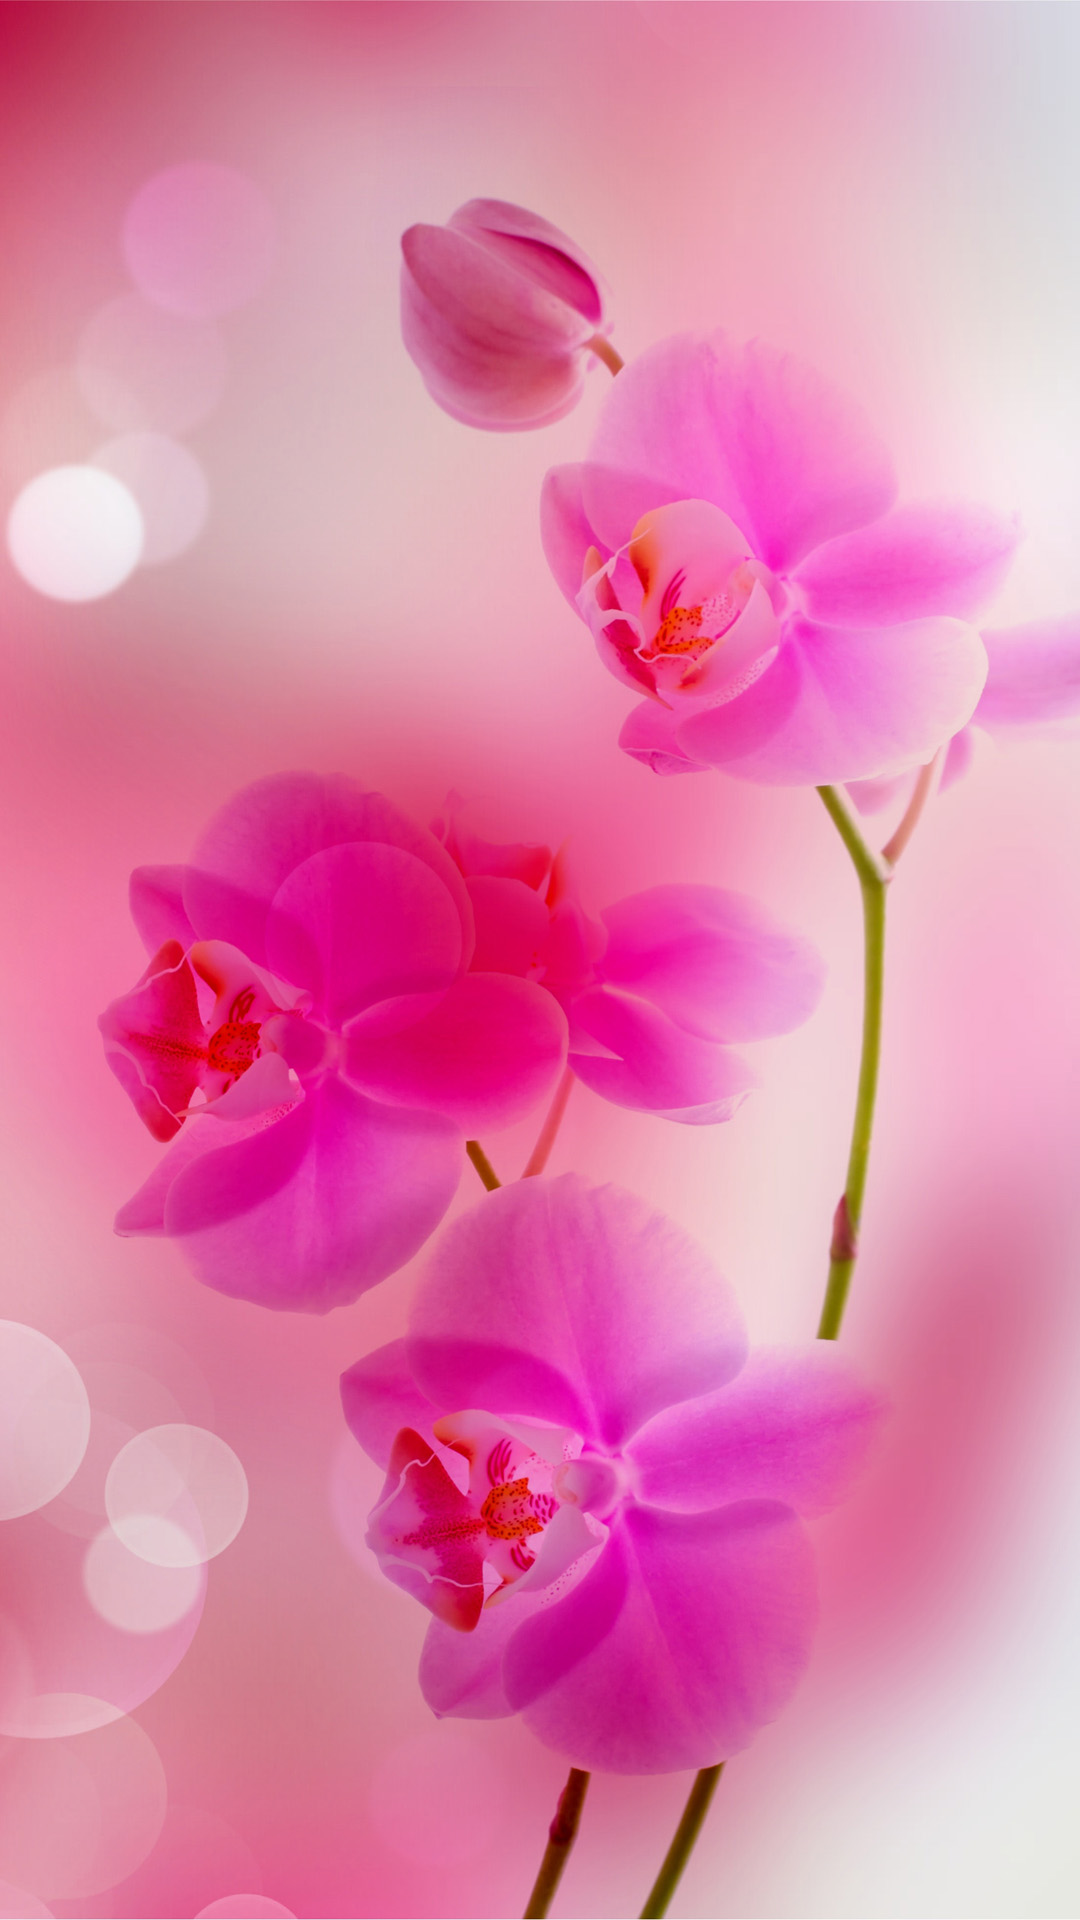 Free Download Pink Flowers Iphone 6 Plus Wallpaper - Flower Wallpaper Iphone 6s Plus - HD Wallpaper 